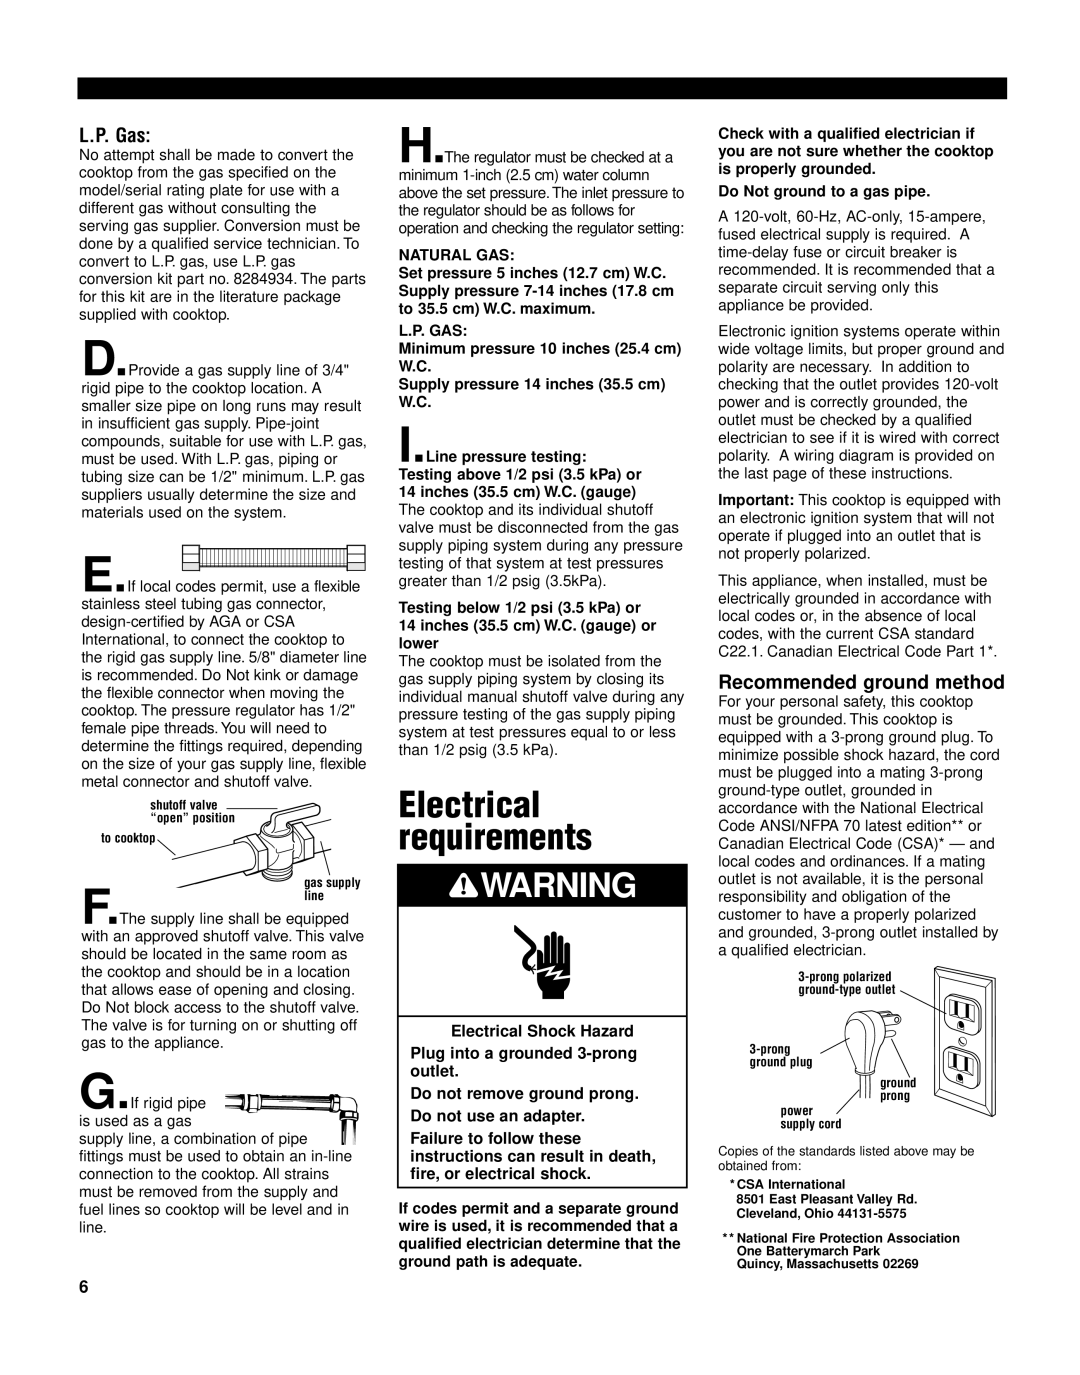 KitchenAid KGCP462K installation instructions Electrical requirements, L.P. Gas, Recommended ground method 